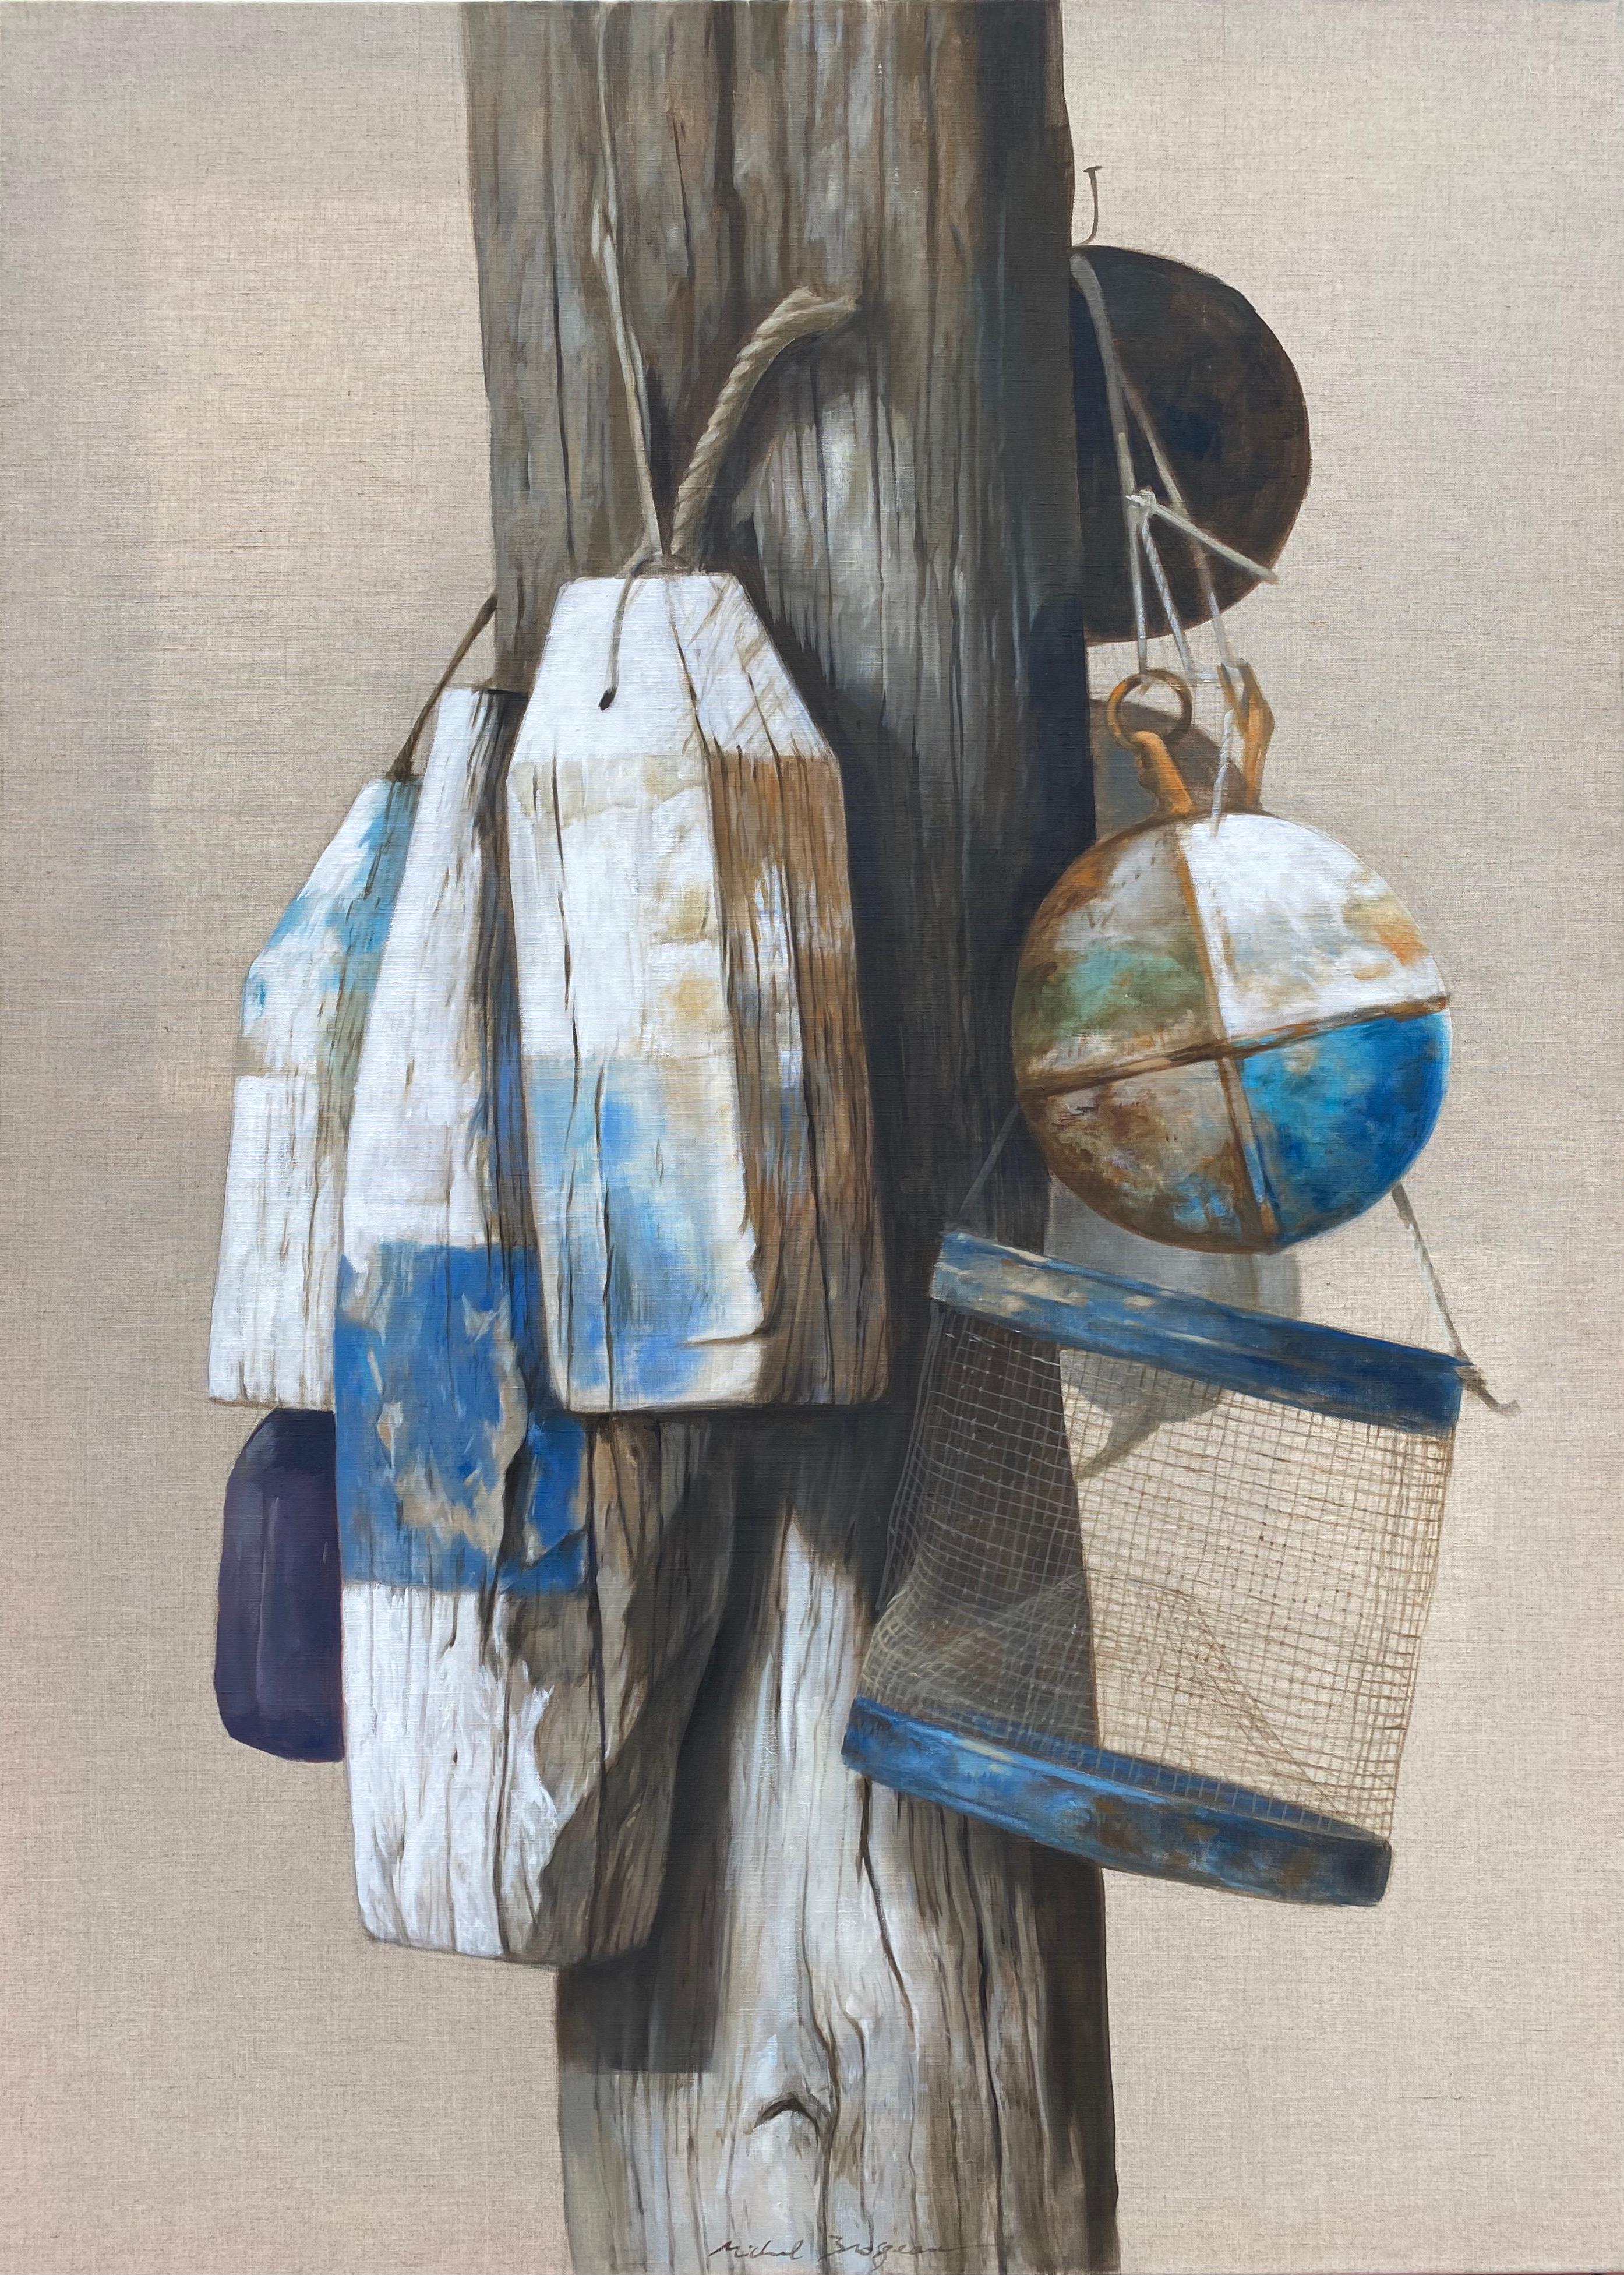 Michel Brosseau Still-Life Painting - "Awaiting The Catch" oil painting of hanging buoy and closures in blue and white